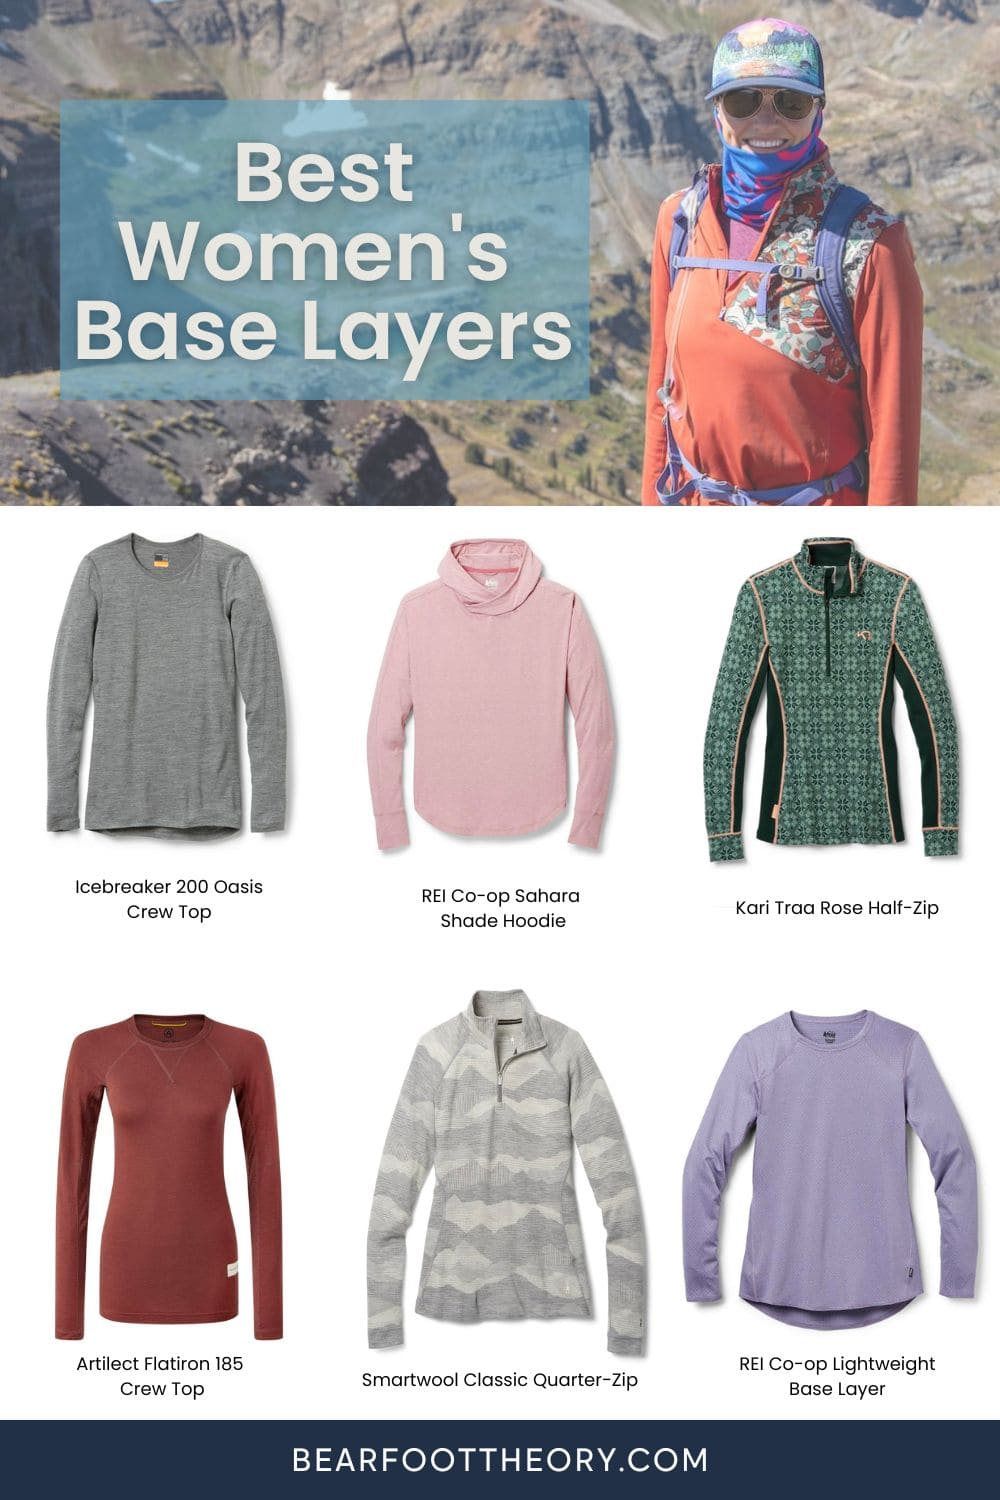 Stay warm and comfortable on your next outdoor adventure with the best women's base layers. Whether you're hitting the slopes or hiking through the mountains, the right base layer is essential for regulating your body temperature. We've done the research and rounded up the top picks for women to keep you cozy and stylish all winter long. Say goodbye to bulky and uncomfortable layers and hello to a world of soft, breathable and fashionable base layers.